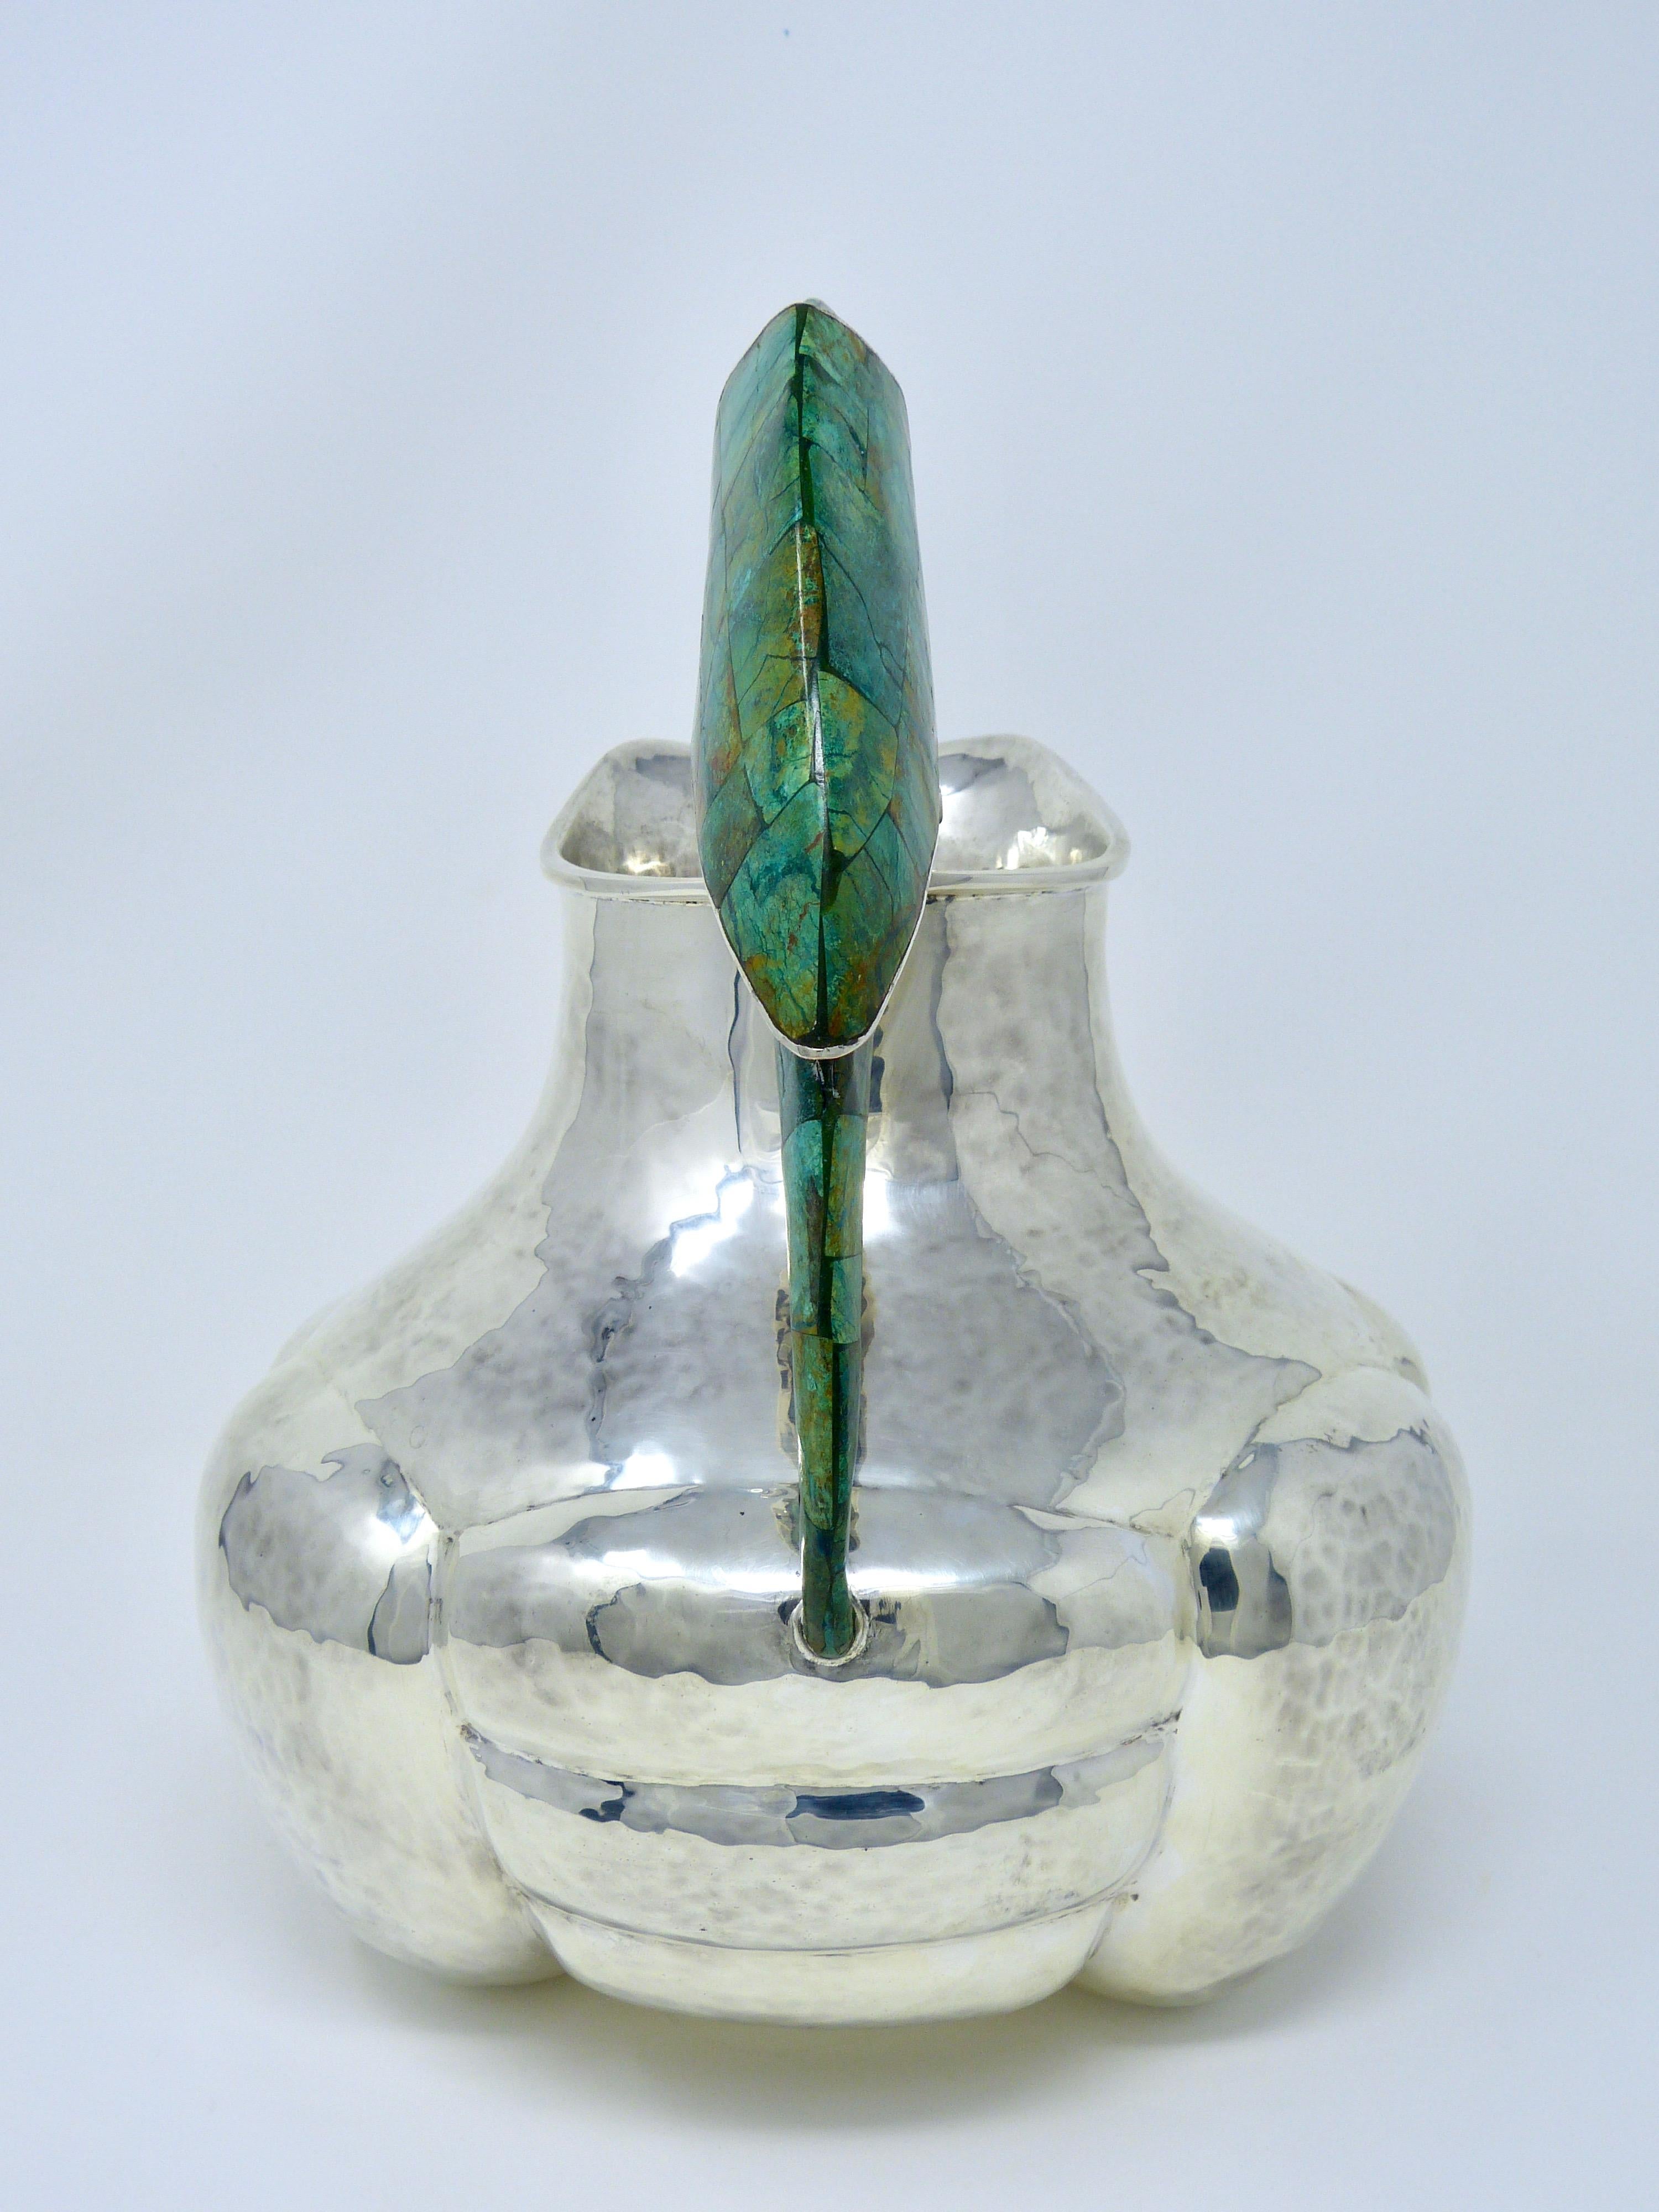 Hammered Emilia Castillo Silver Plated and Malachite Water Pitcher with Parrot Taxco, Mx